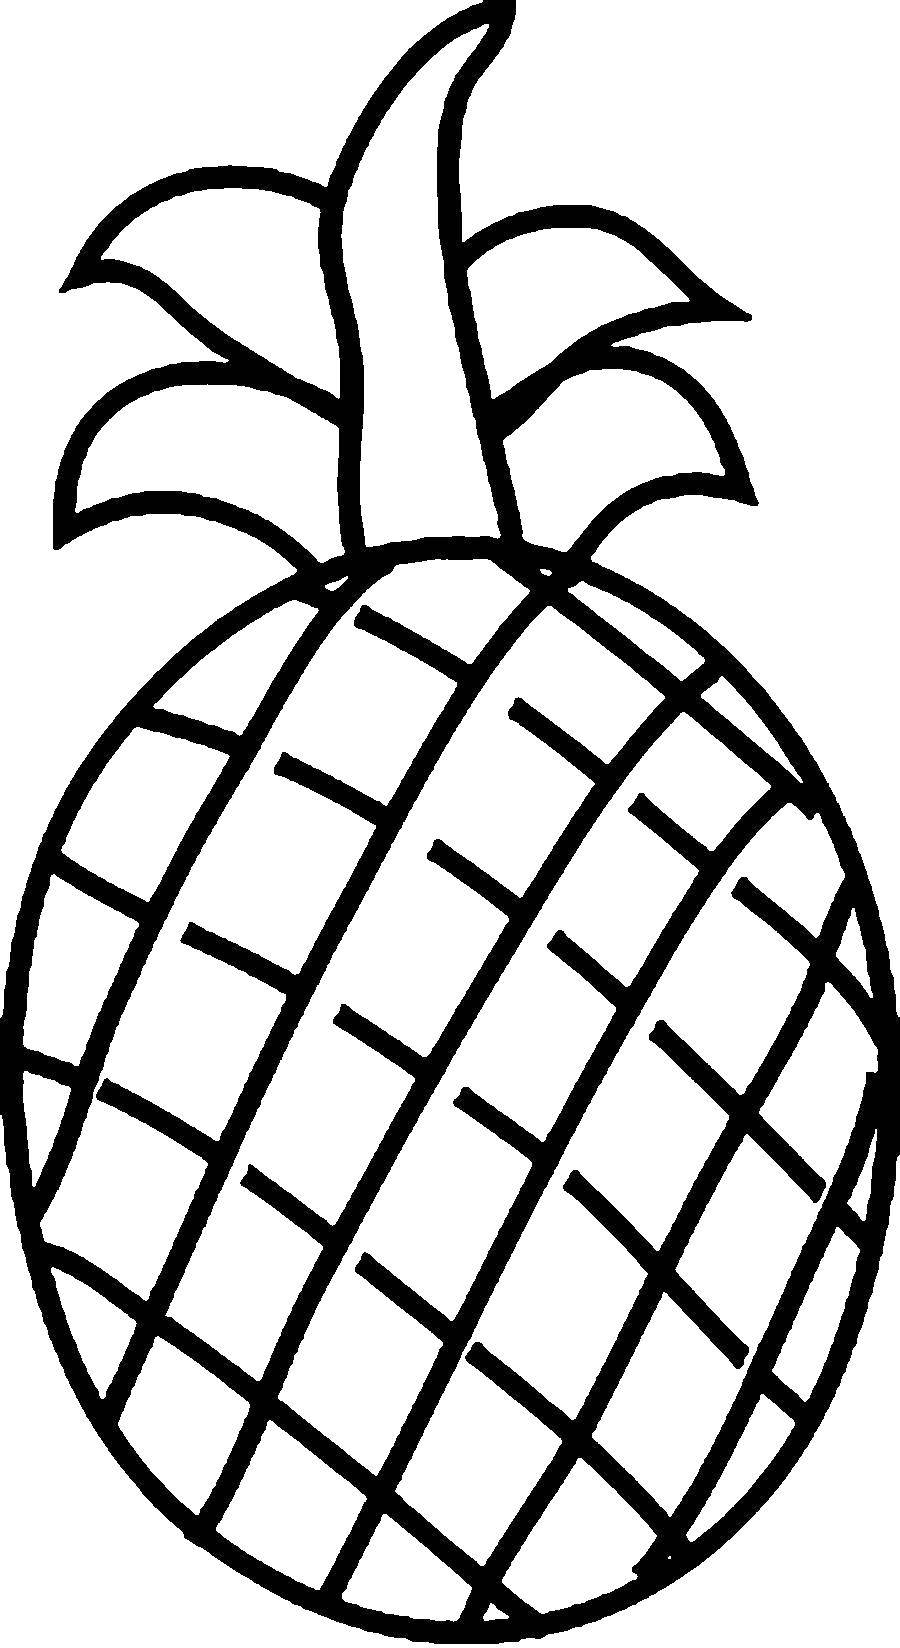 Coloring The contour of the pineapple. Category The contours of fruit. Tags:  contour, pineapple.